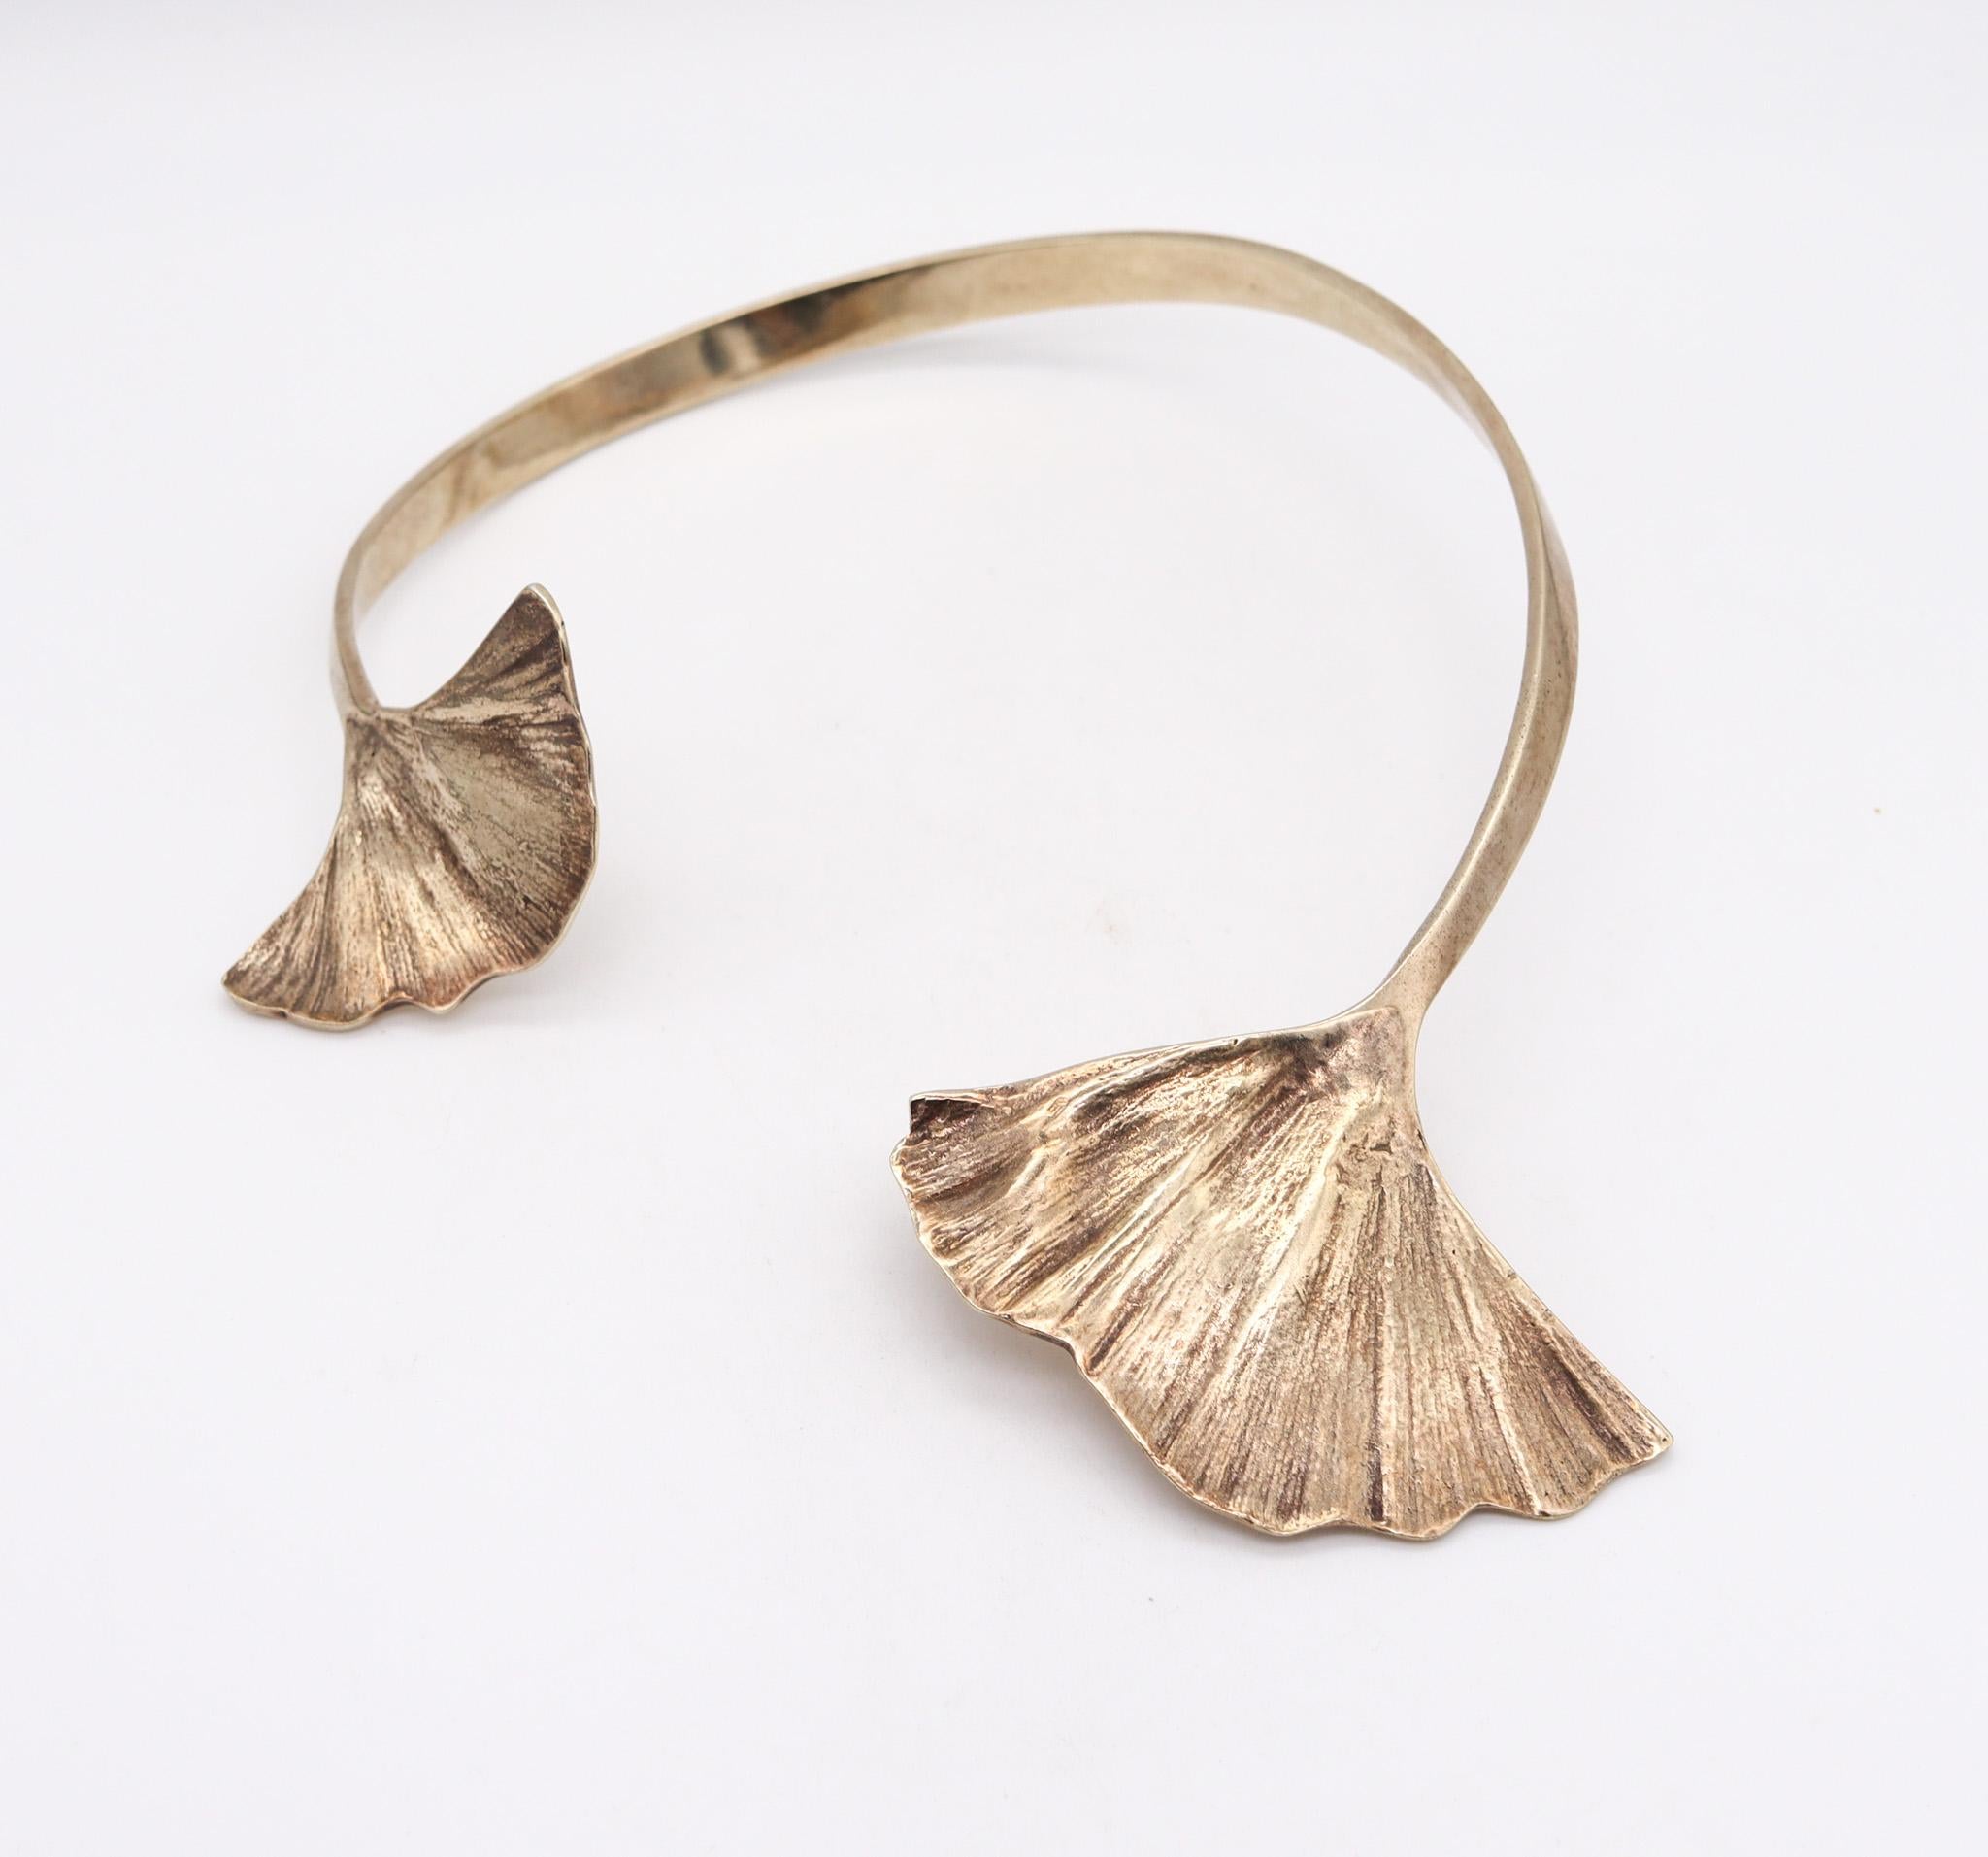 Double gingko necklace designed by Paul Oudet (1946-).

A prototype sculptural cuff bracelet, created in Paris France by the sculptor Paul Oudet, back in the 1970. This organic piece has been crafted as an unique piece in solid .800/.999 silver with